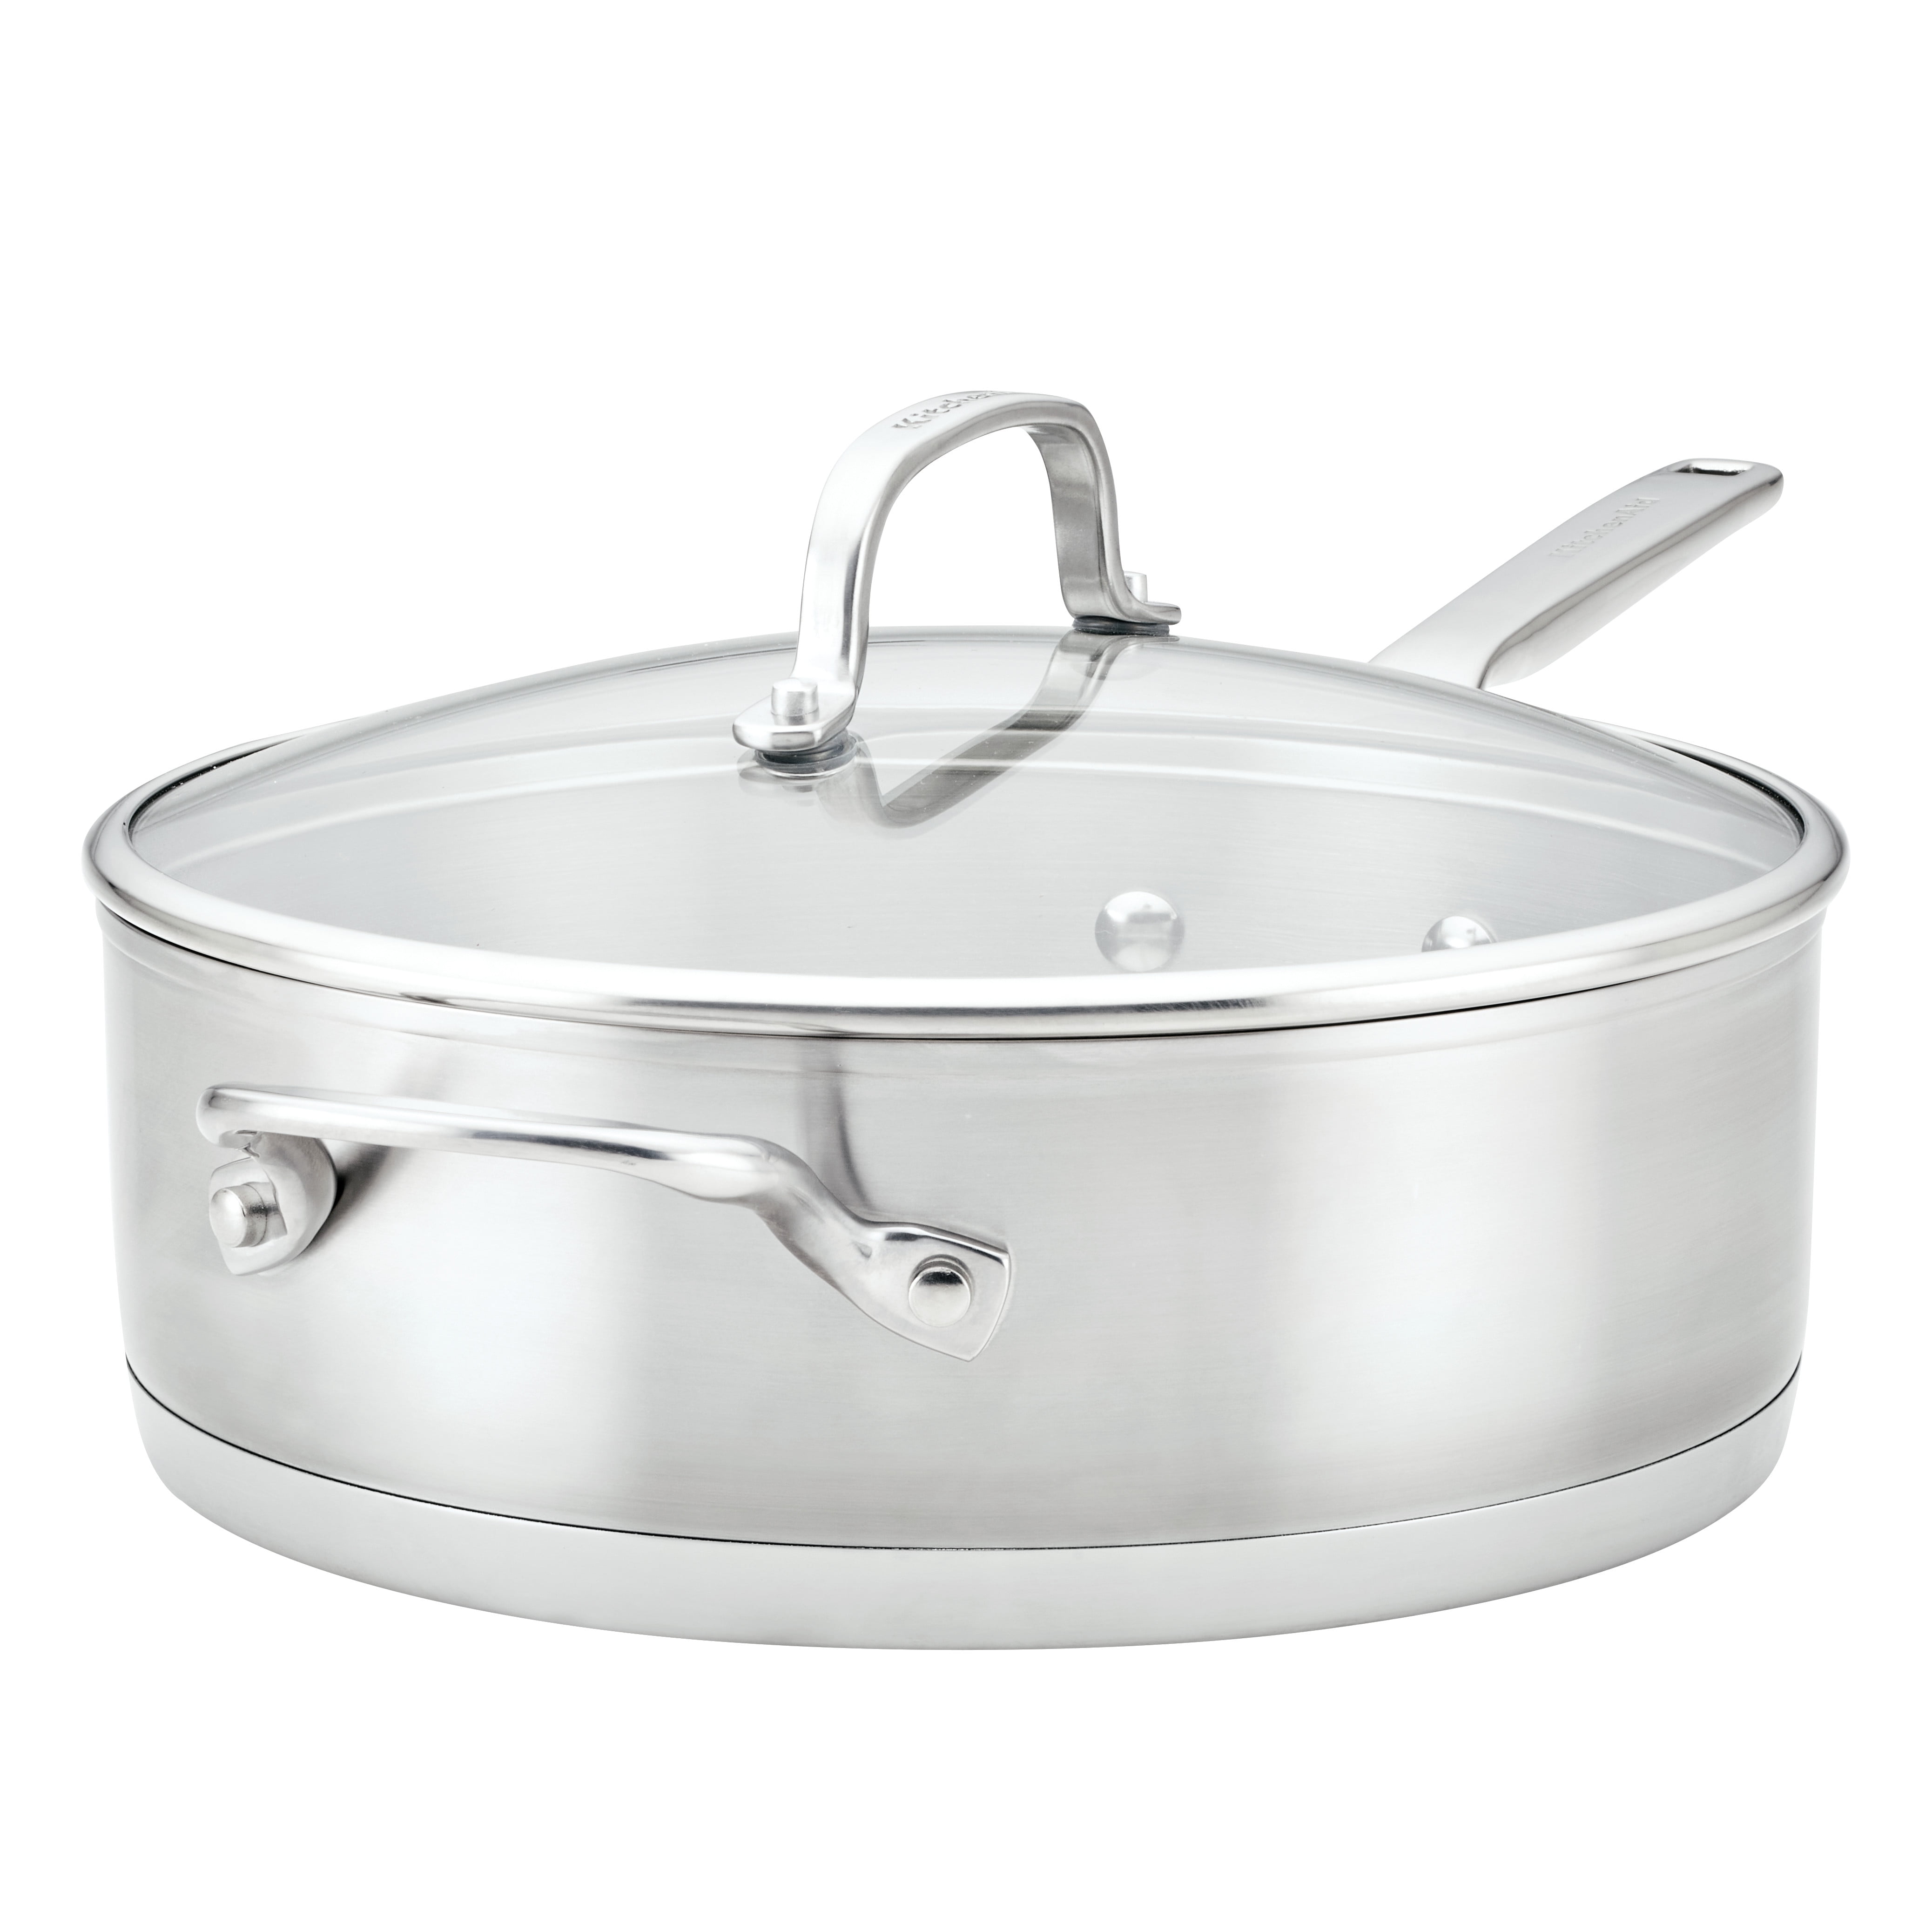 Misen 5-Ply Stainless Steel Cookware Set: 3 QT Stainless Steel Saucier with  Lid, 3 QT Saute Pan with Lid & 10 Frying Pan - Excellent Searing